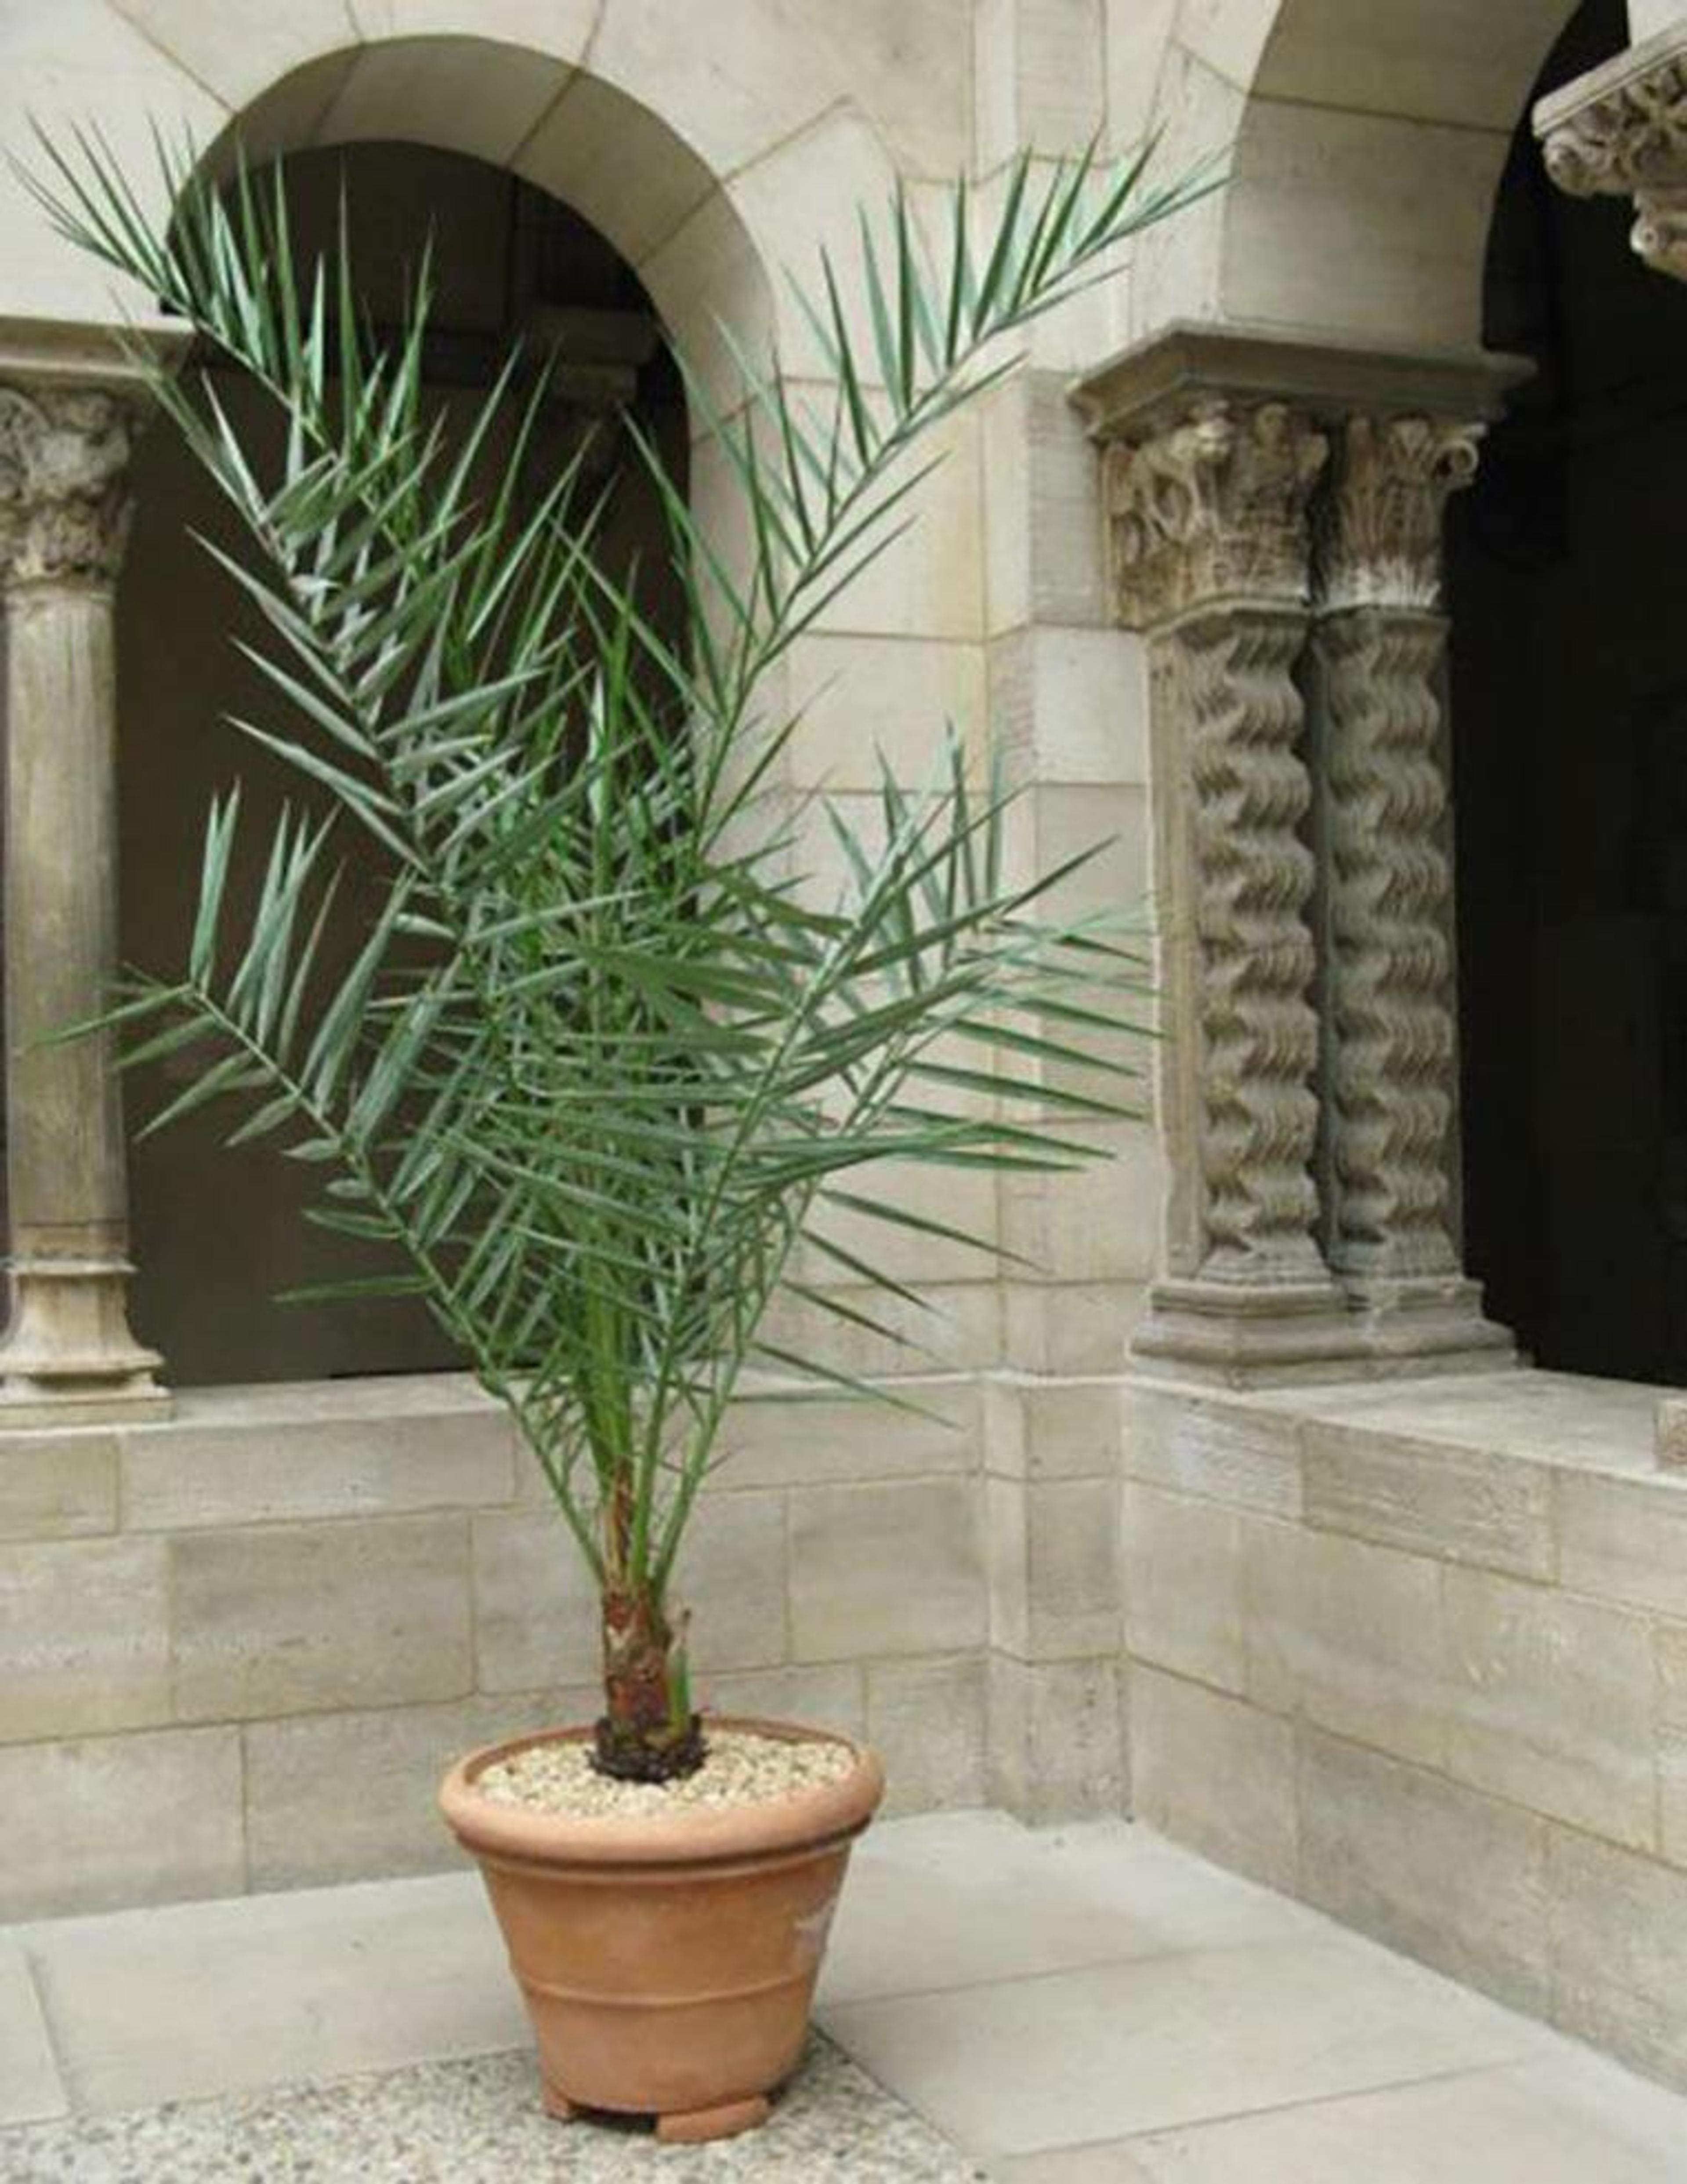 Date palm at the Saint-Guilhem Cloister at The Met Cloisters